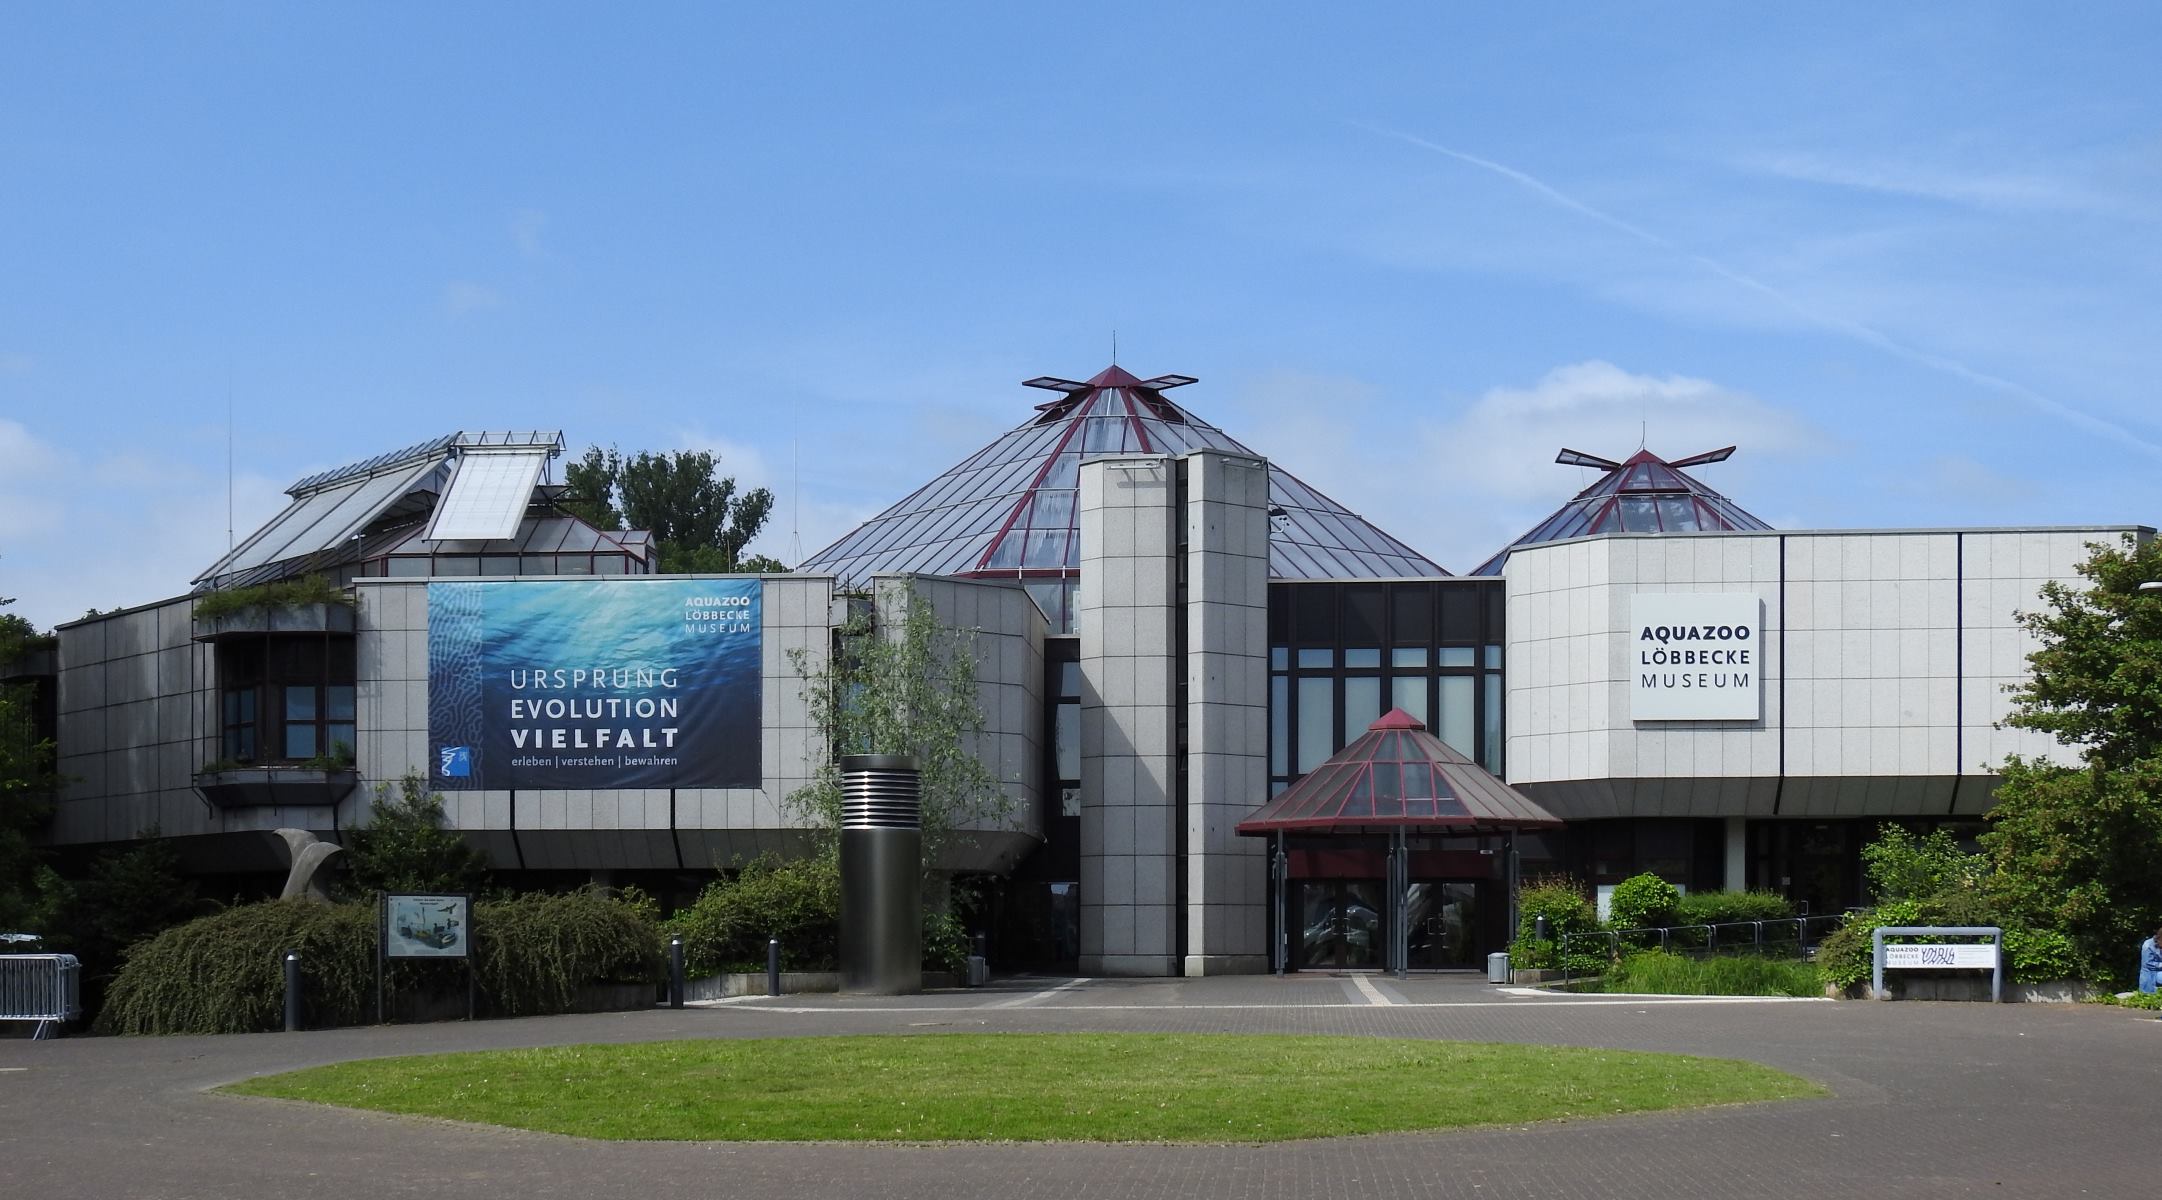 17-enigmatic-facts-about-aquazoo-lobbecke-museum